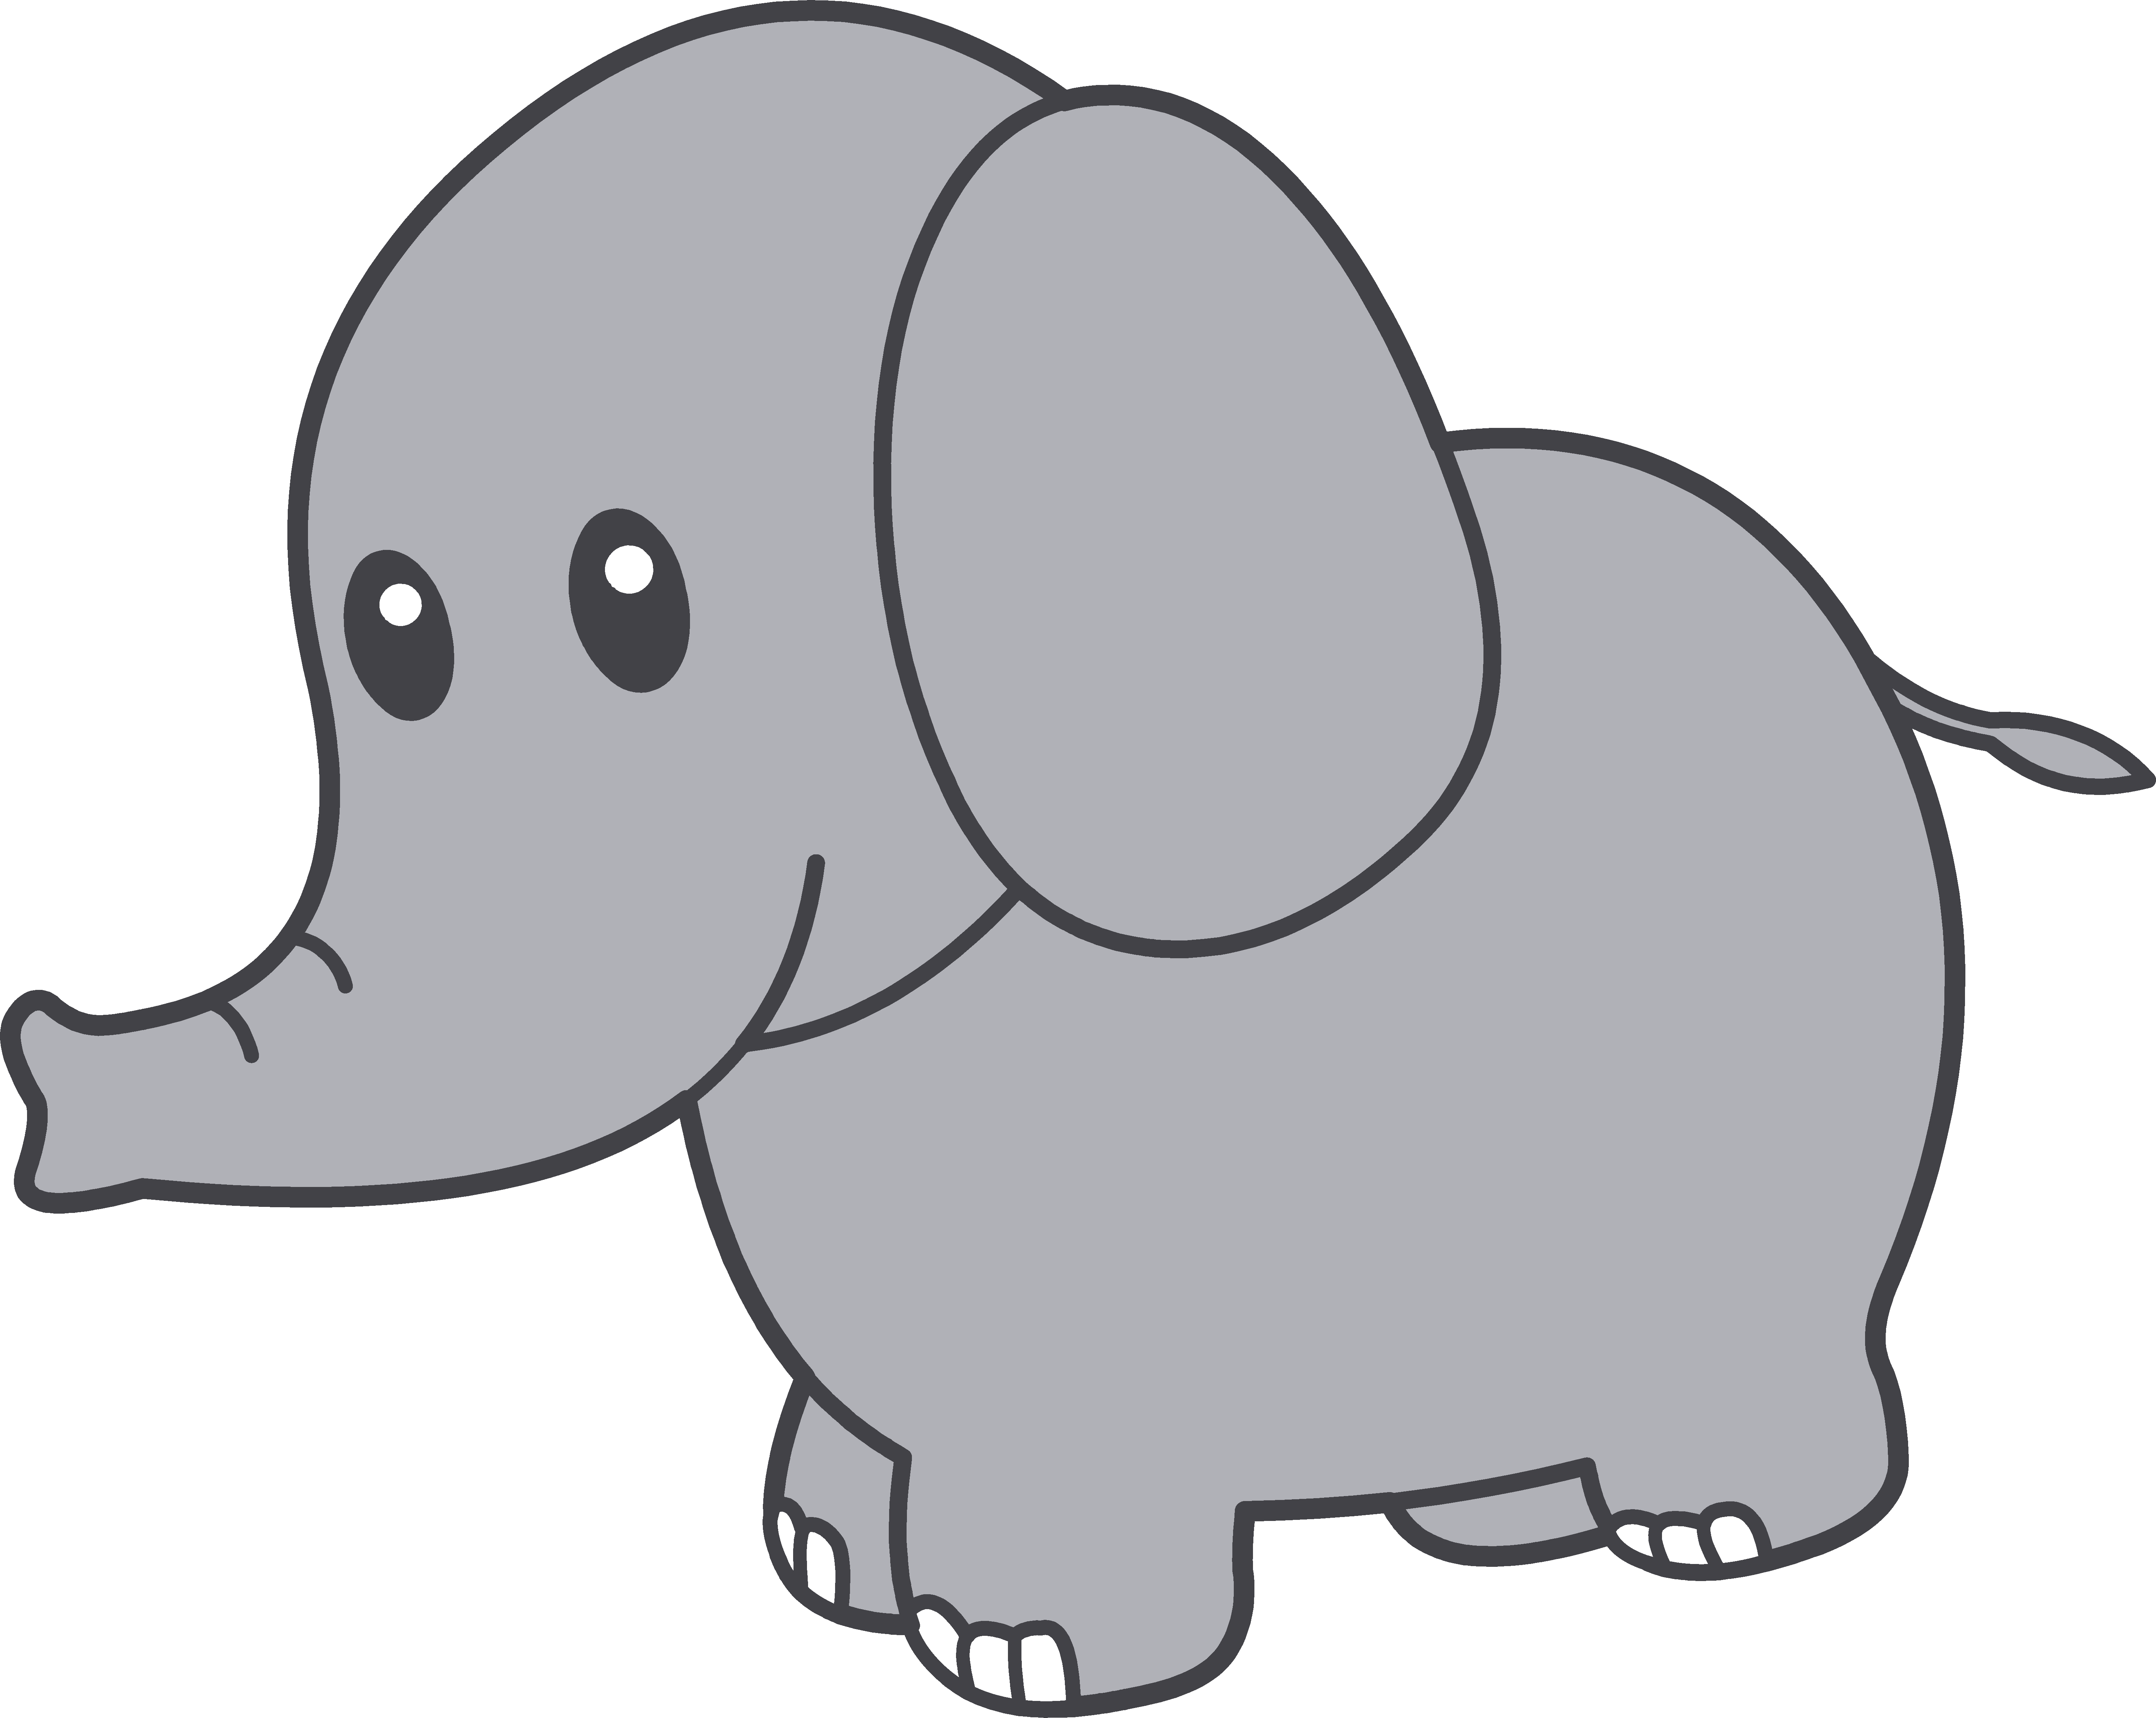 Cute Elephant Clipart - Free Clipart Images